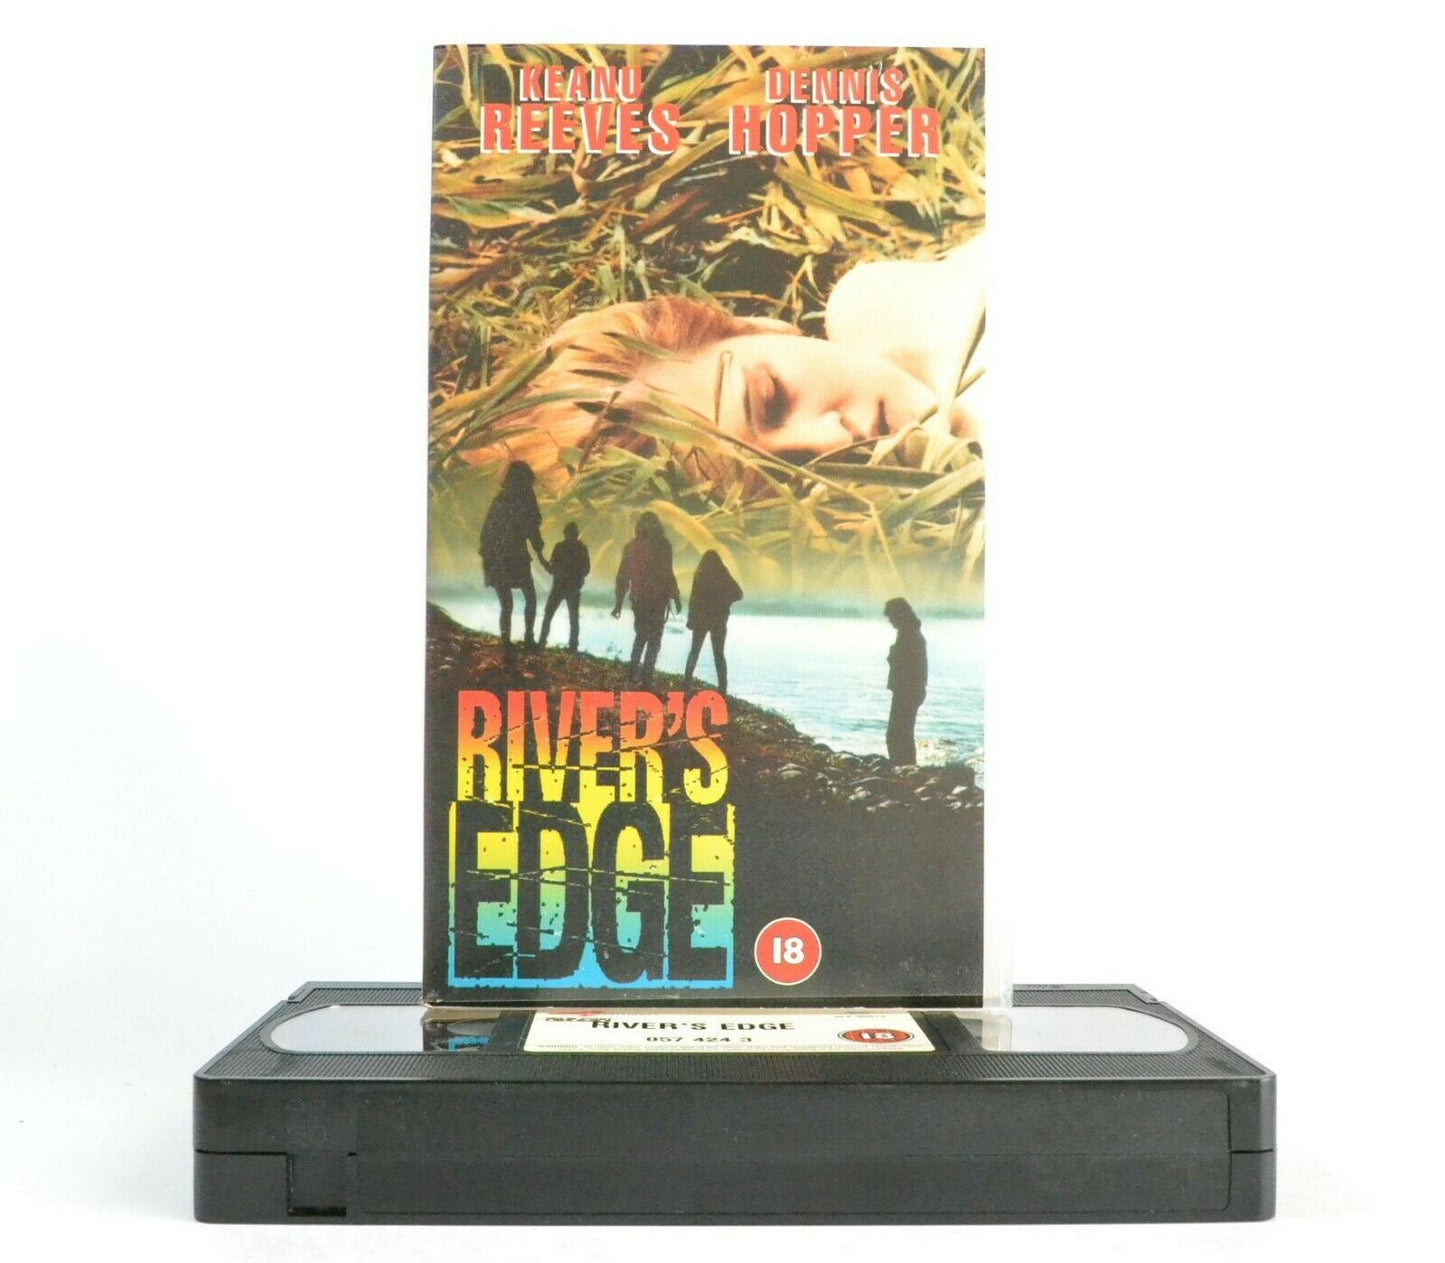 River's Edge: A T.Hunter Film - Independent Crime Movie - Keanu Reeves - VHS-